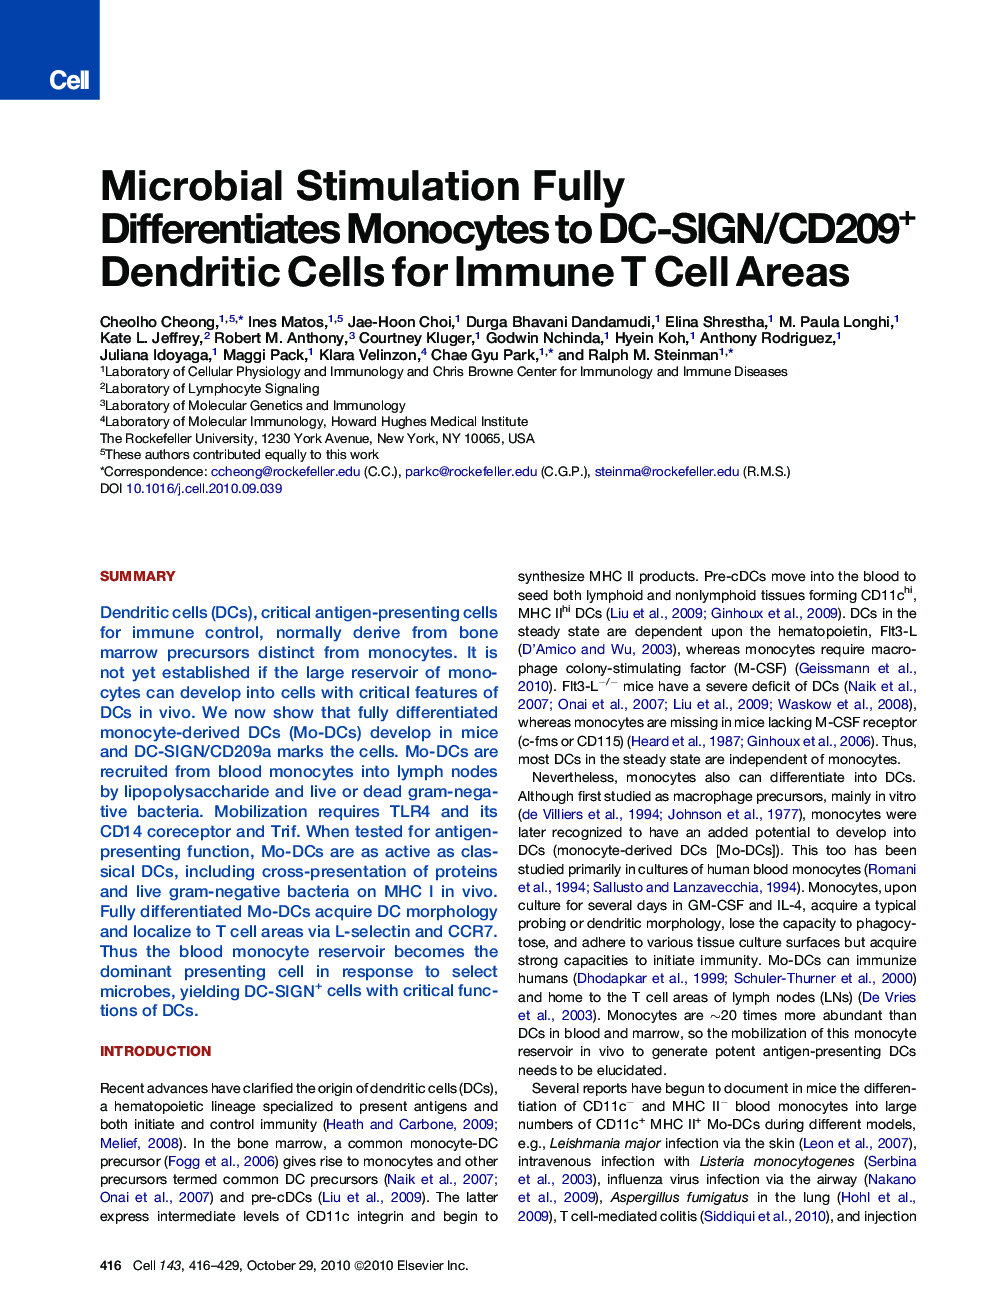 Microbial Stimulation Fully Differentiates Monocytes to DC-SIGN/CD209+ Dendritic Cells for Immune T Cell Areas